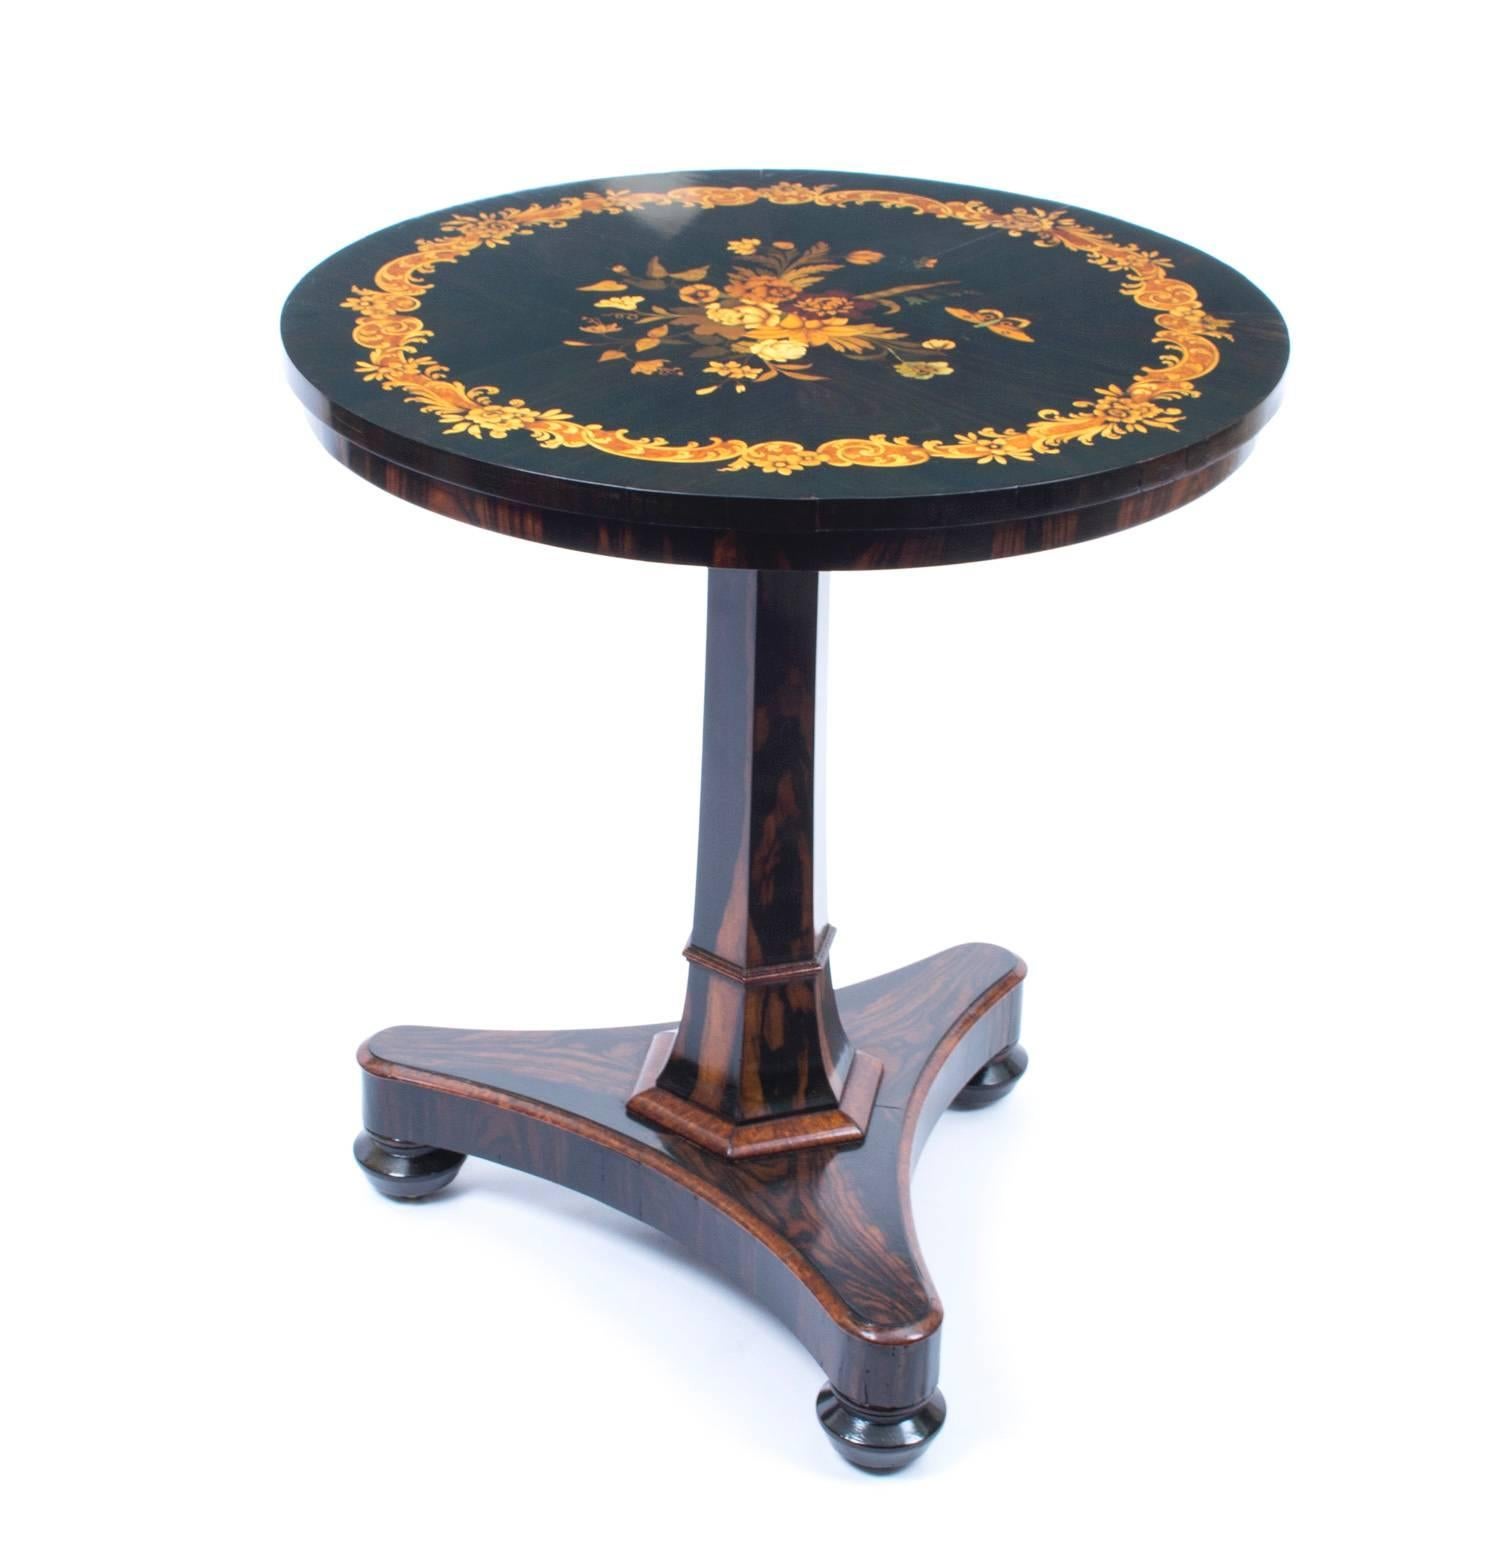 This elegantly proportioned antique Regency occasional table is circa 1825 in date.

This table has been masterfully crafted in coromandel wood and the circular top masterfully inlaid with a beautiful floral marquetry spray and butterfly.

It is